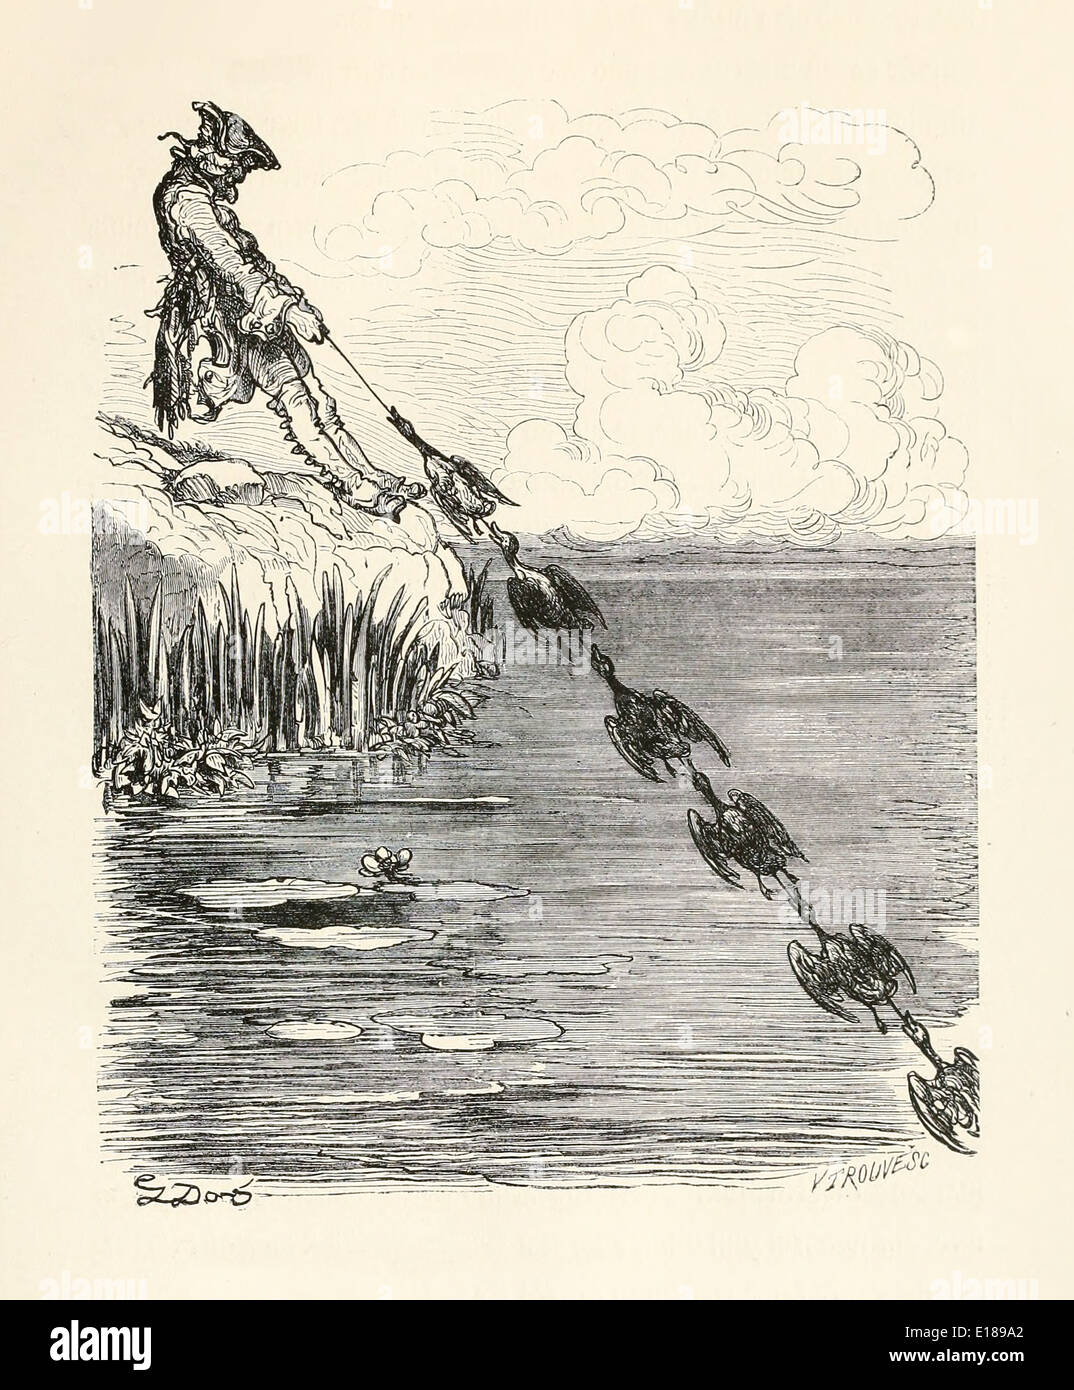 Chapter 2 The Baron catching ducks with bacon fat: 'They were strung like pearls'. Paul Gustave Doré (1832-1883) Illustration from ‘The Adventures of Baron Munchausen’ by Rudoph Raspe published in 1862. Stock Photo